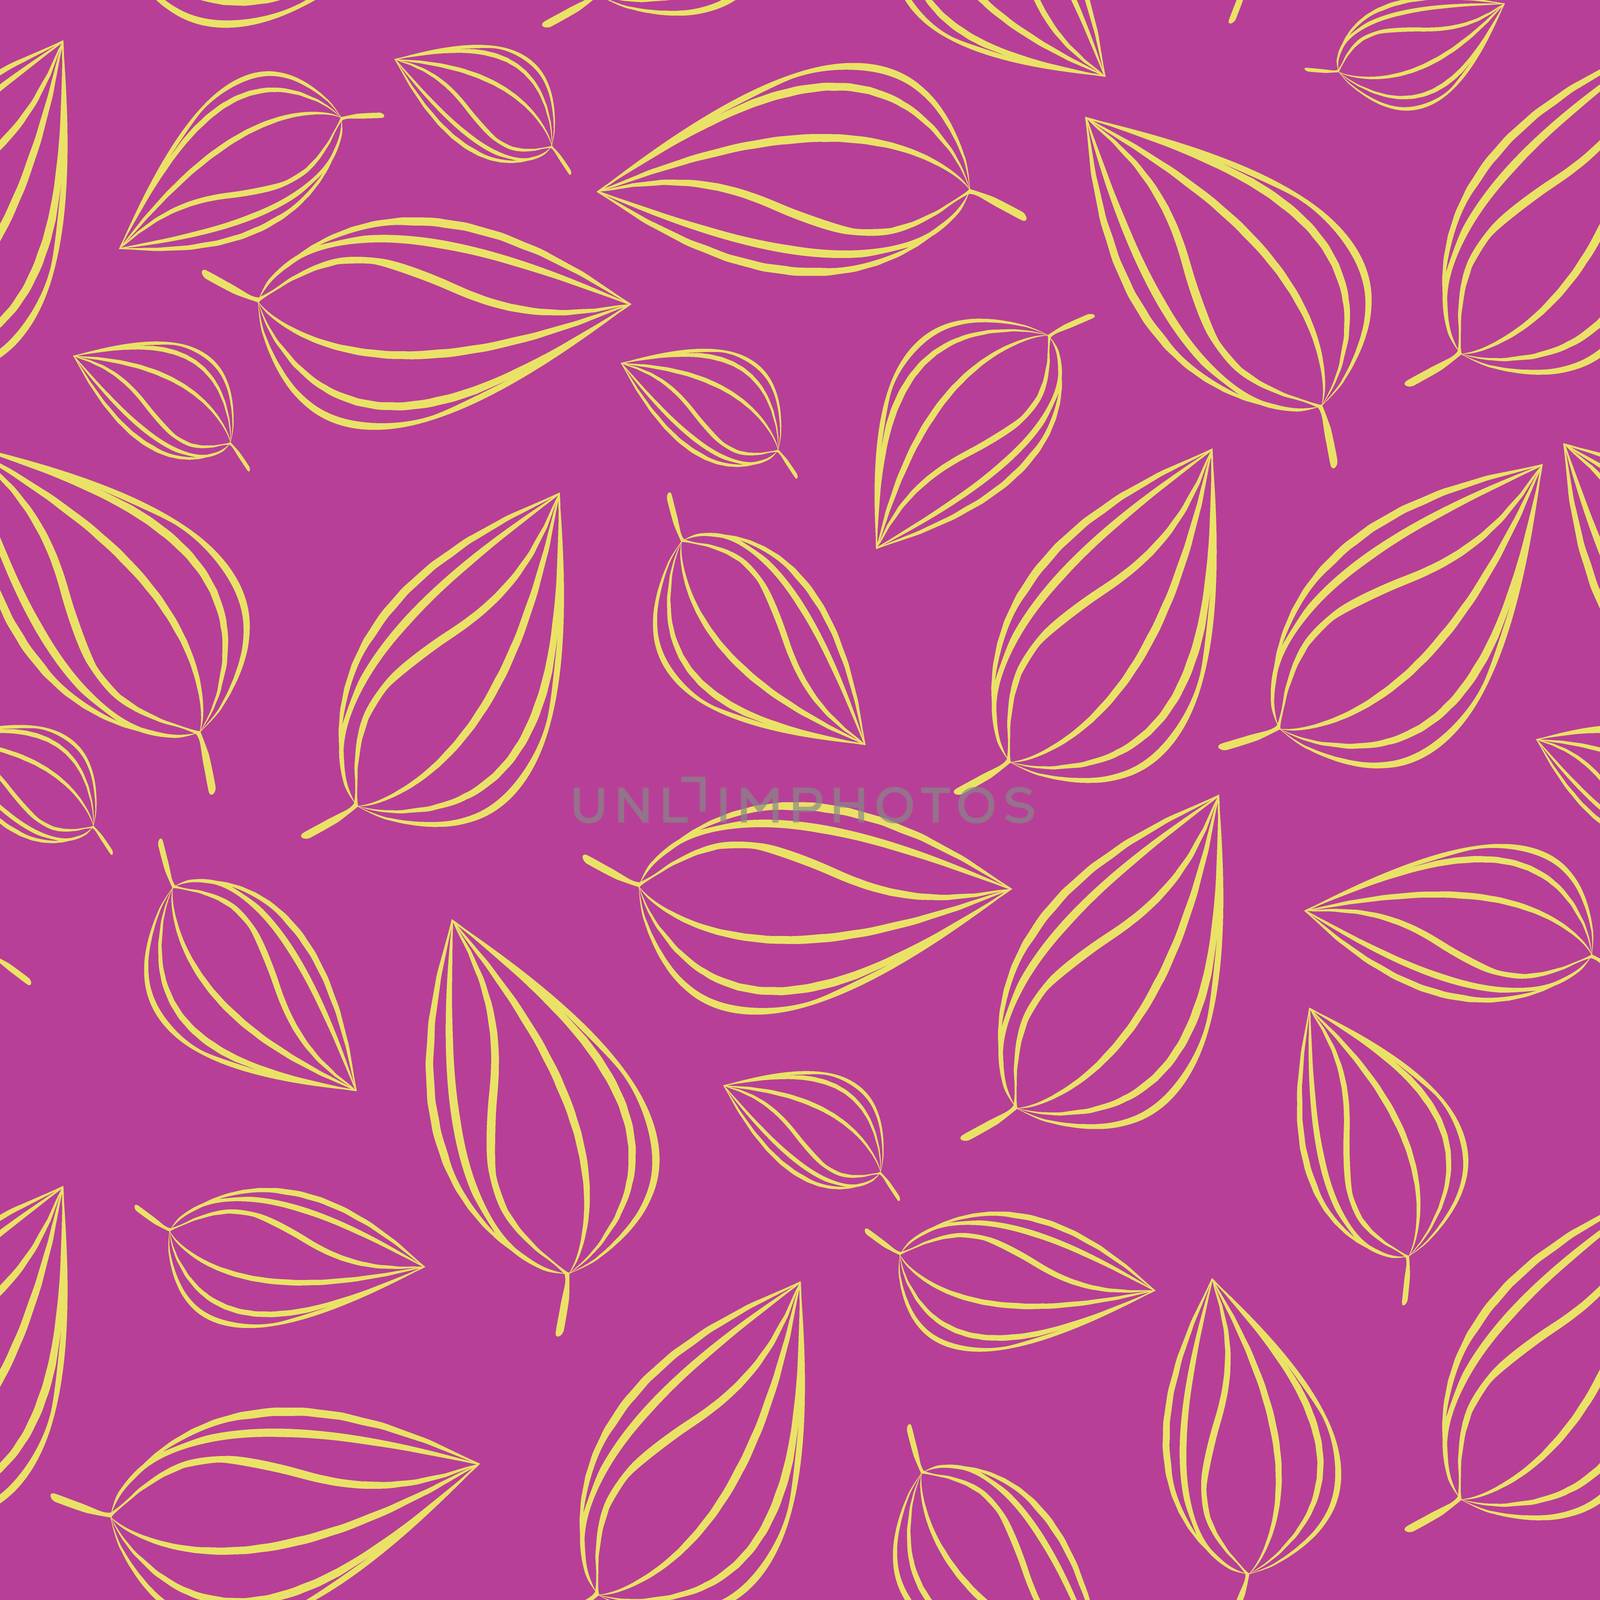 Seamless pattern background with autumn leaves. illustration.